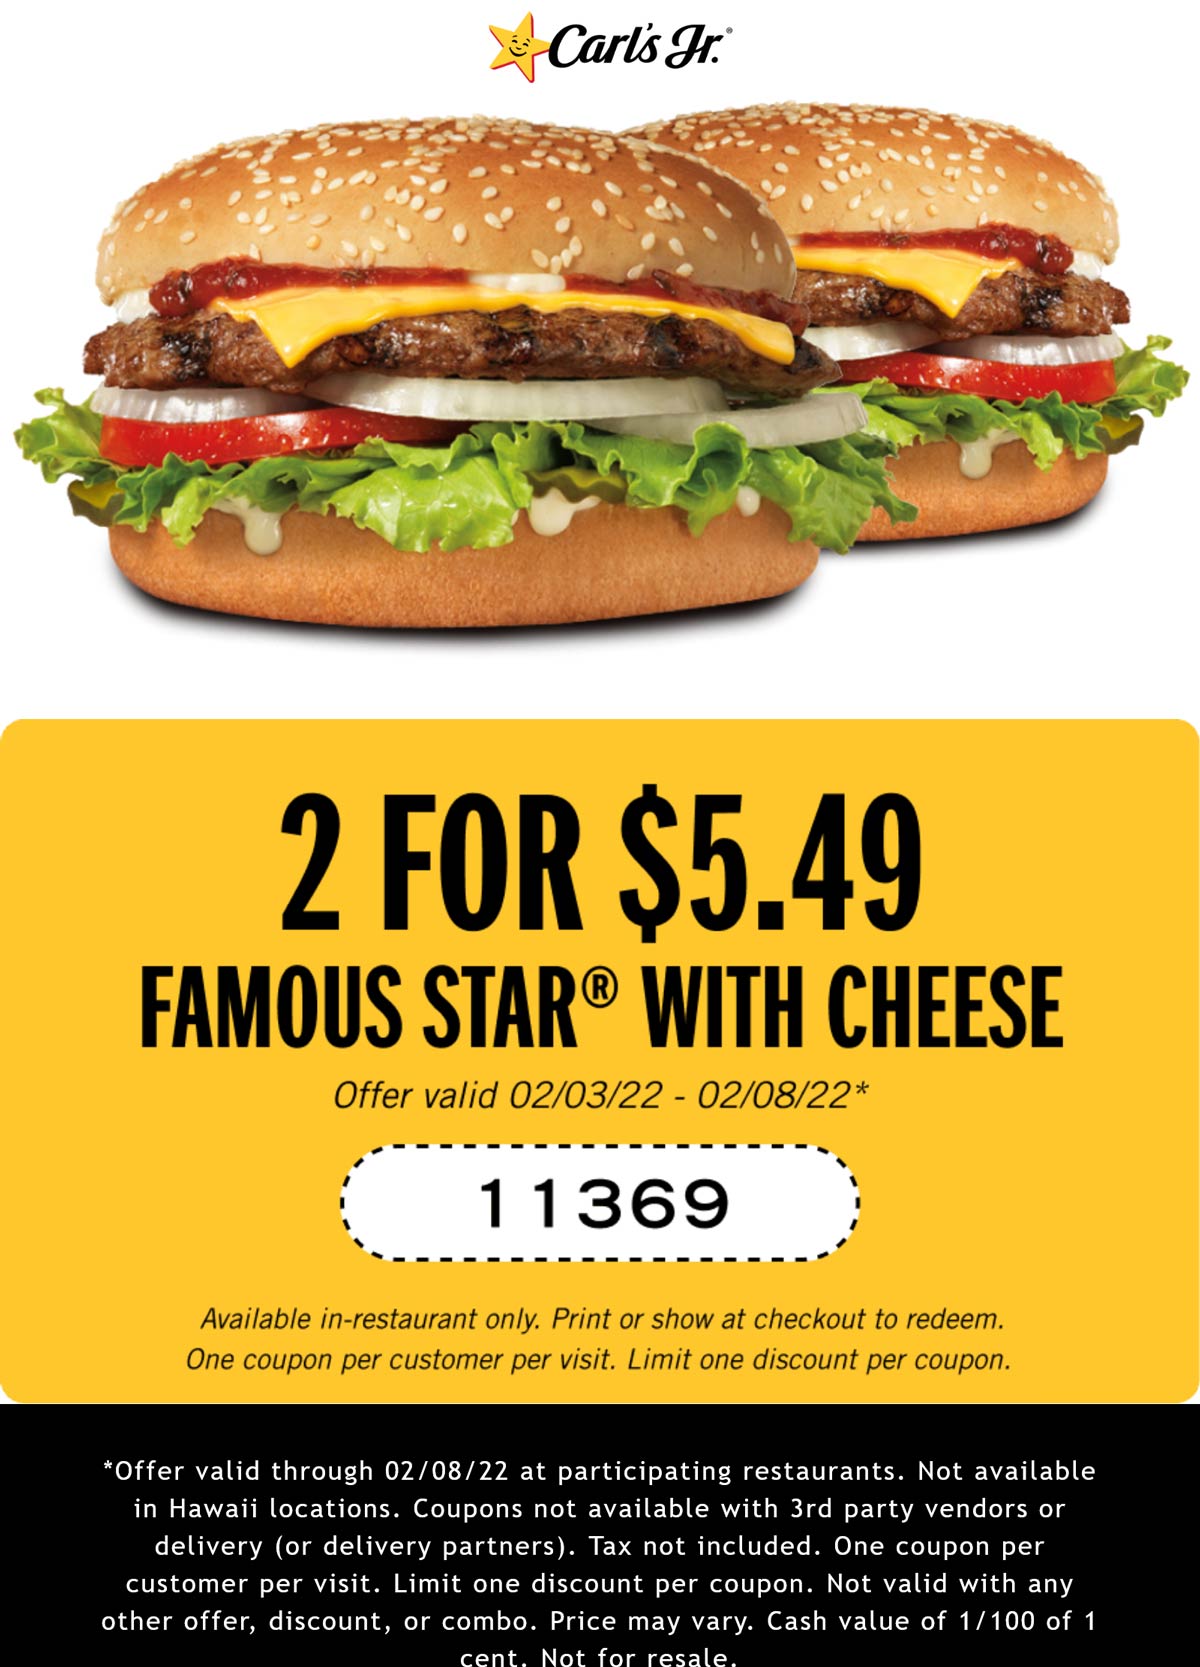 Carls Jr restaurants Coupon  Two famous star cheeseburgers for $5.49 at Carls Jr restaurants #carlsjr 